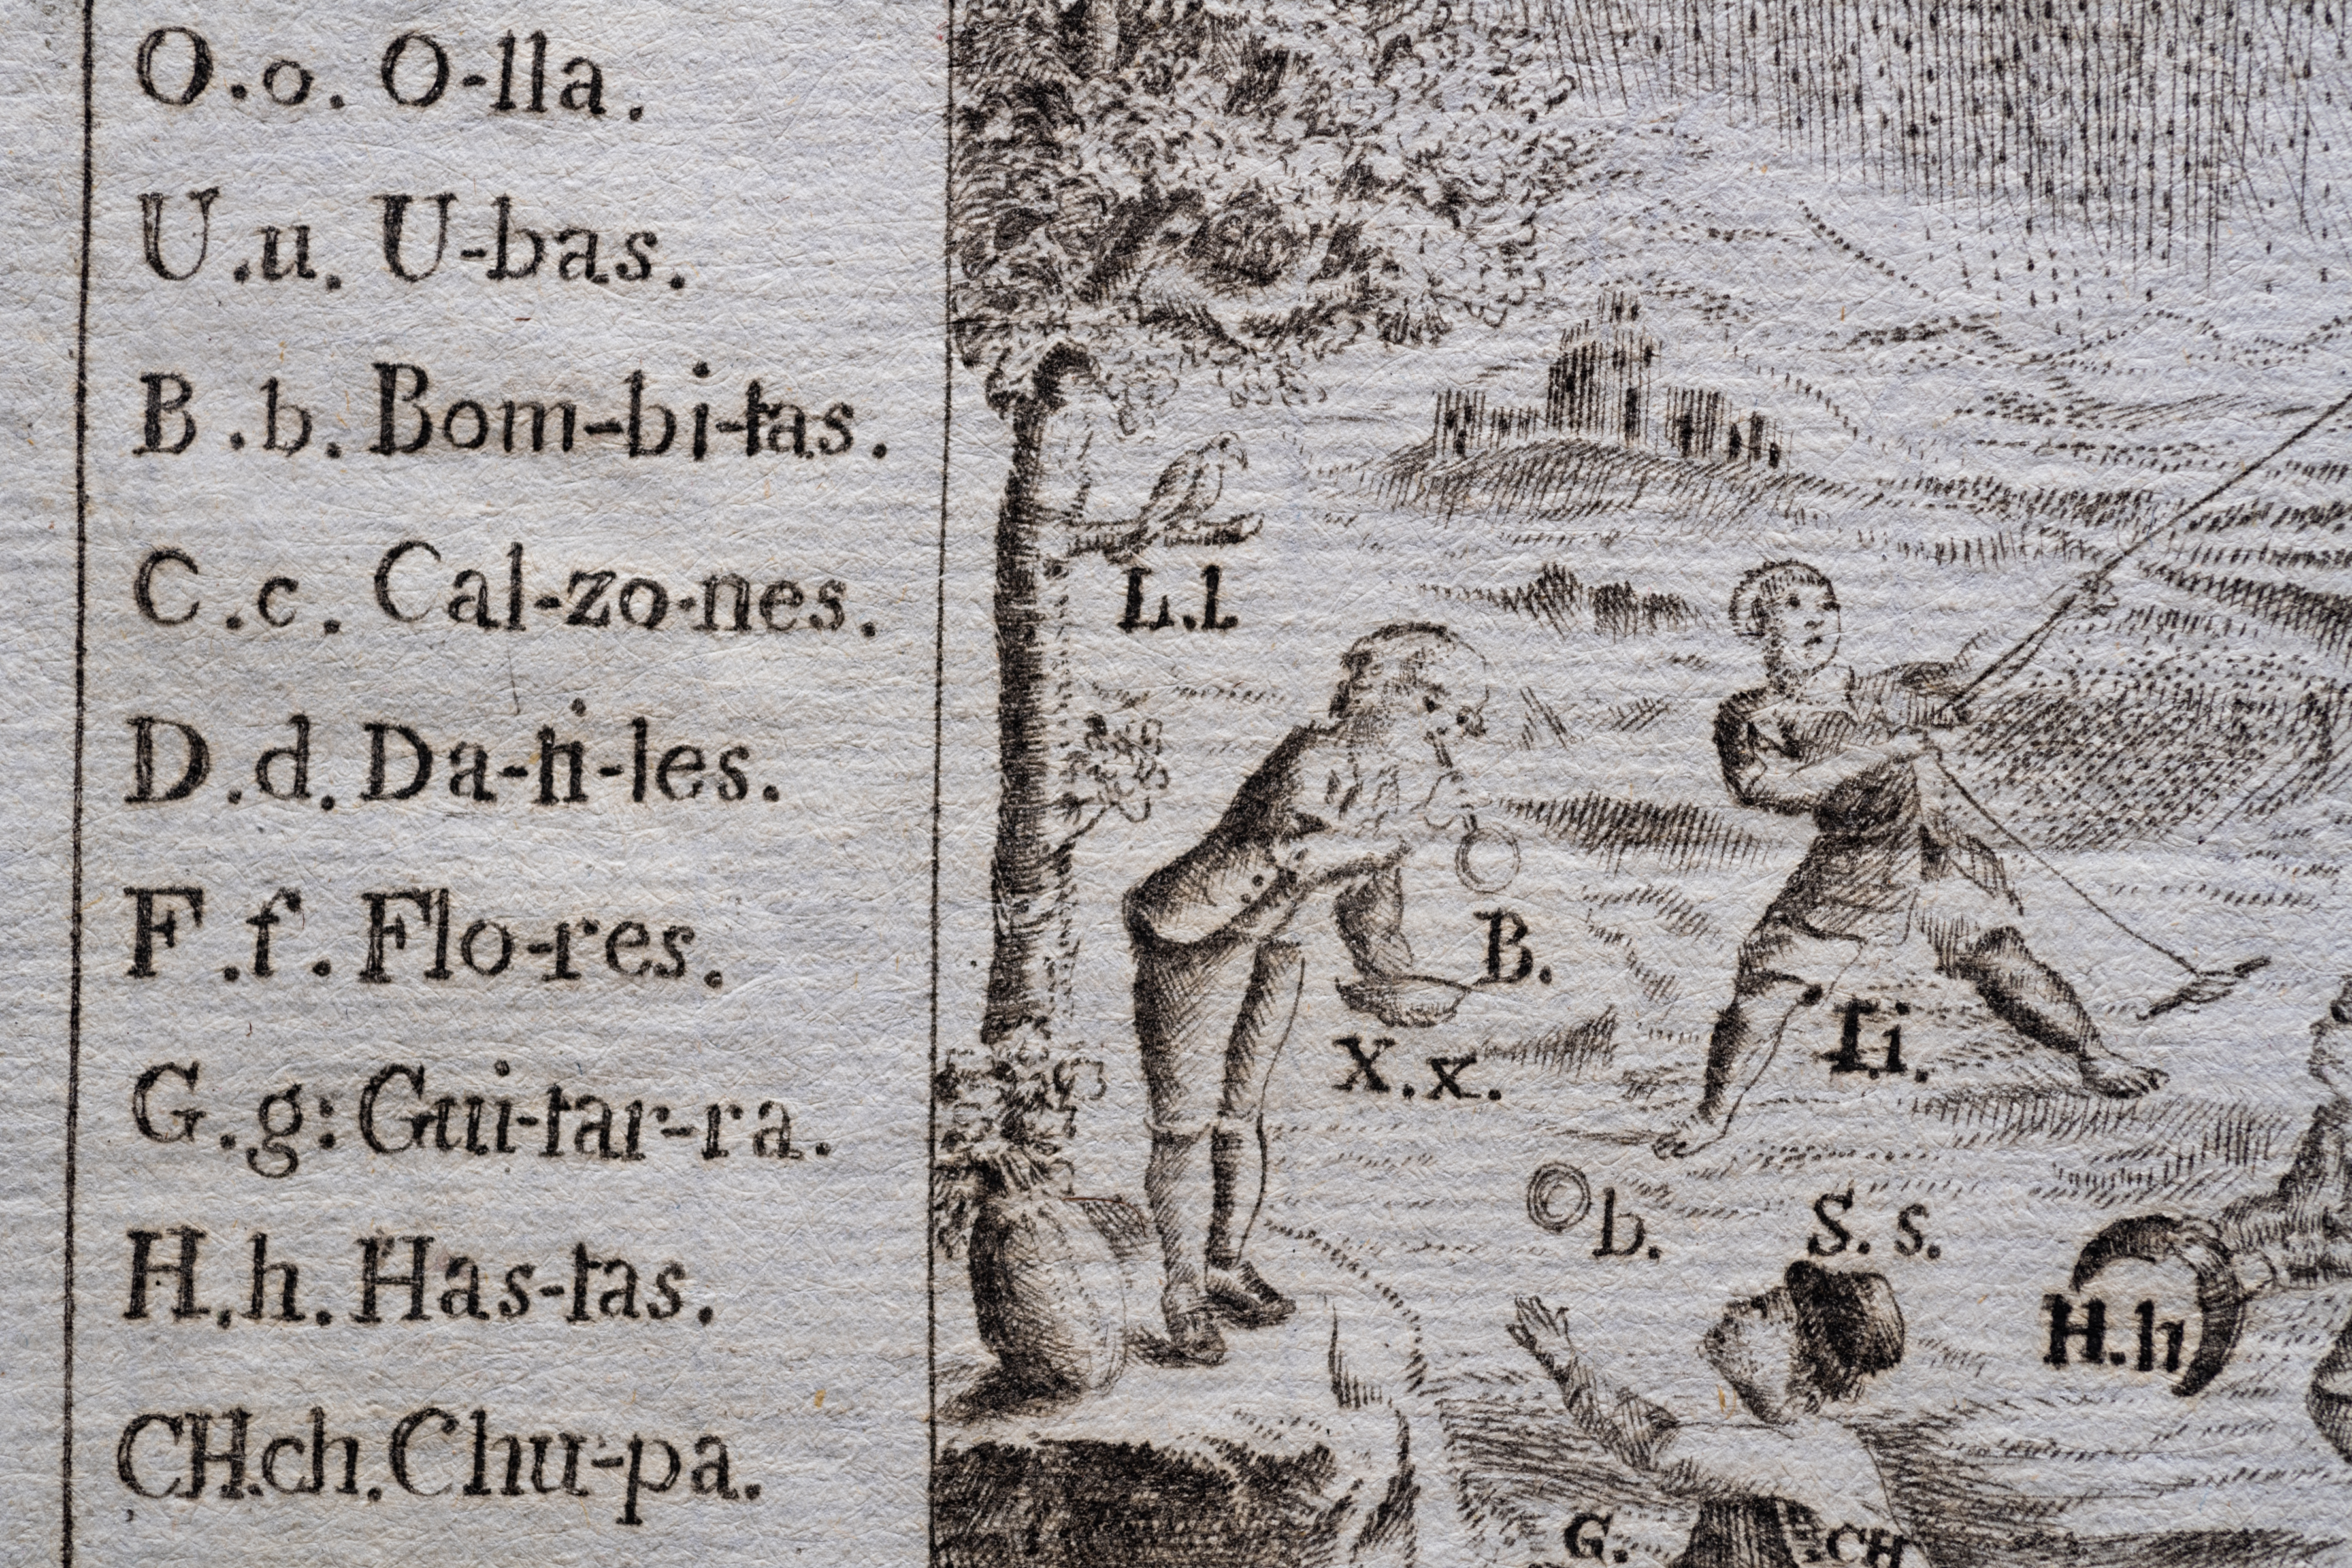 Detail of an engraved print shows children blowing bubbles in a grassy area. Items in the image are labeled and a portion of the key is visible.